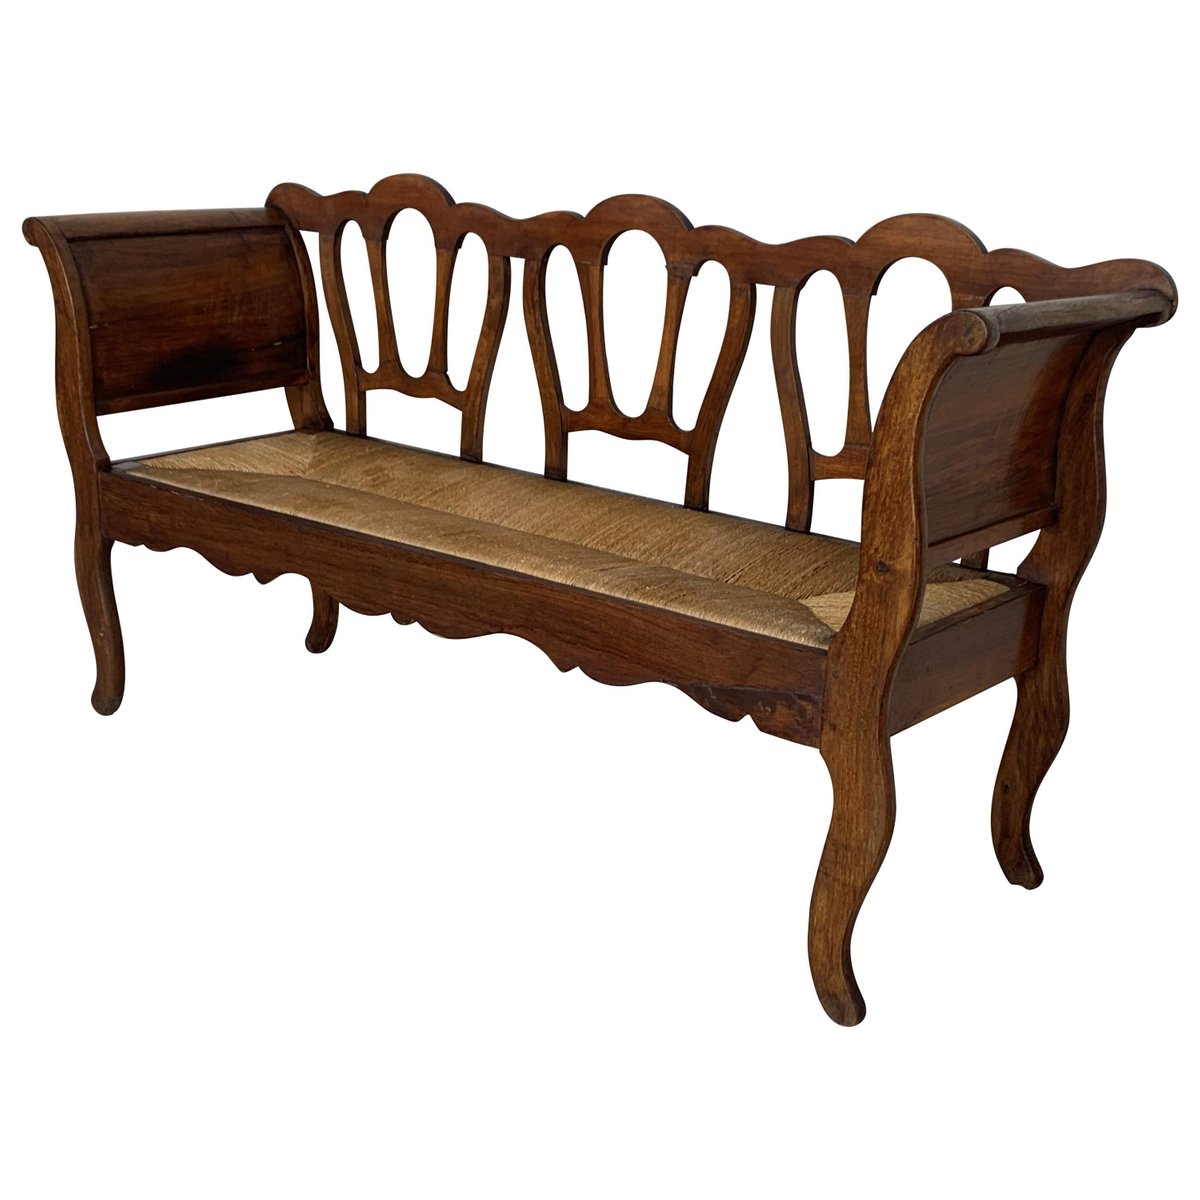 20th century walnut victorian bench in wood and rattan seat PSK-1002913